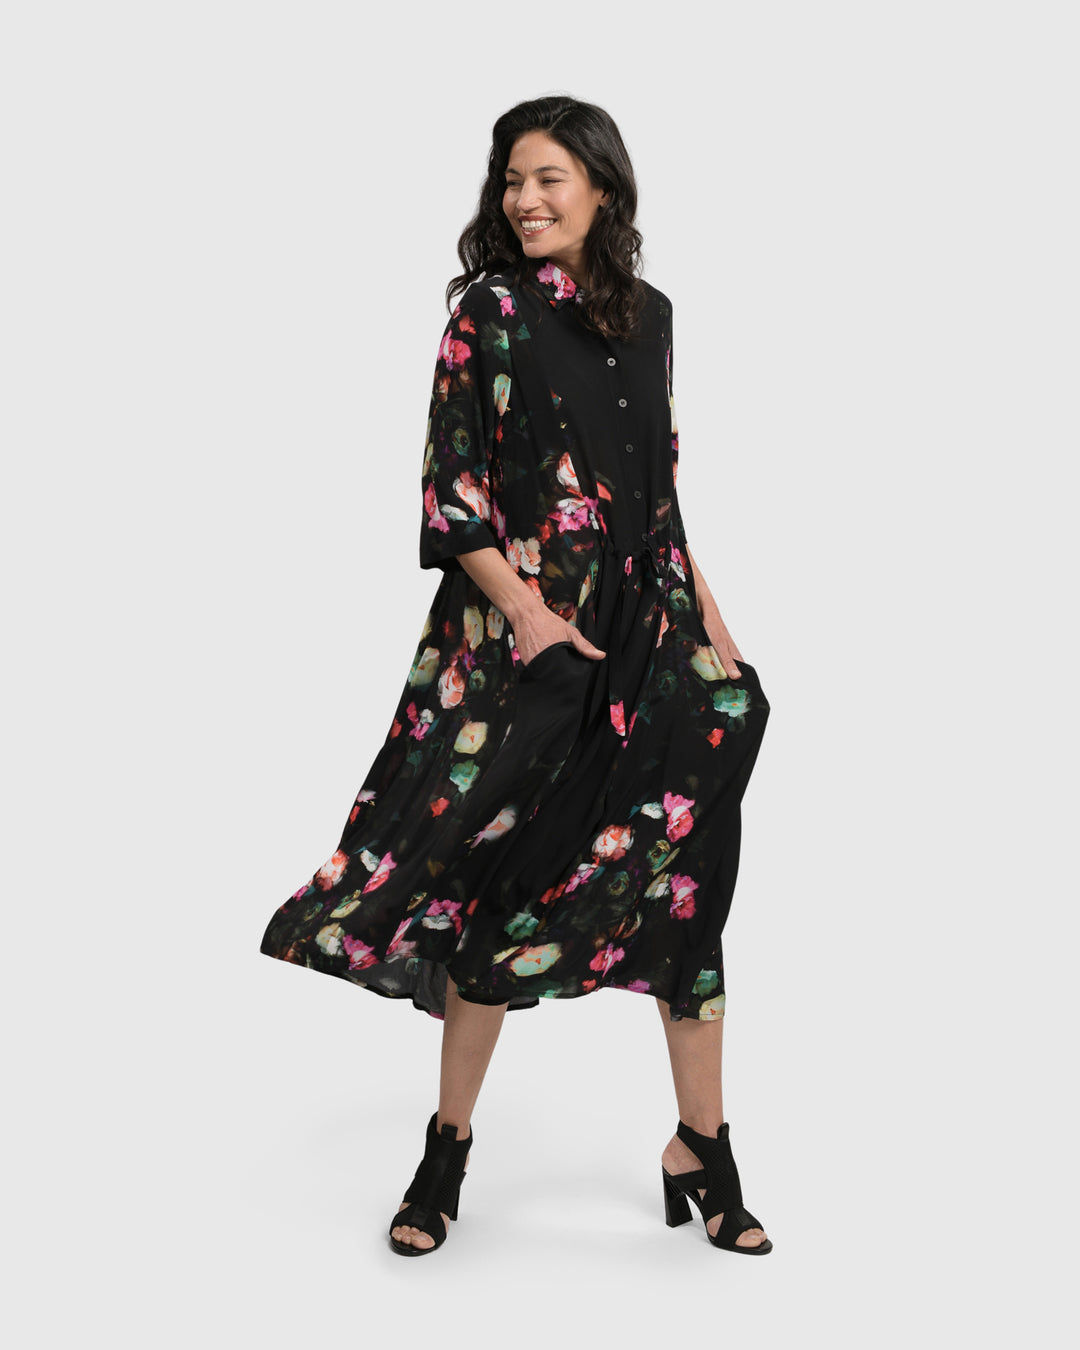 DRINKS-ON-ME MAXI SHIRT DRESS, FLORAL